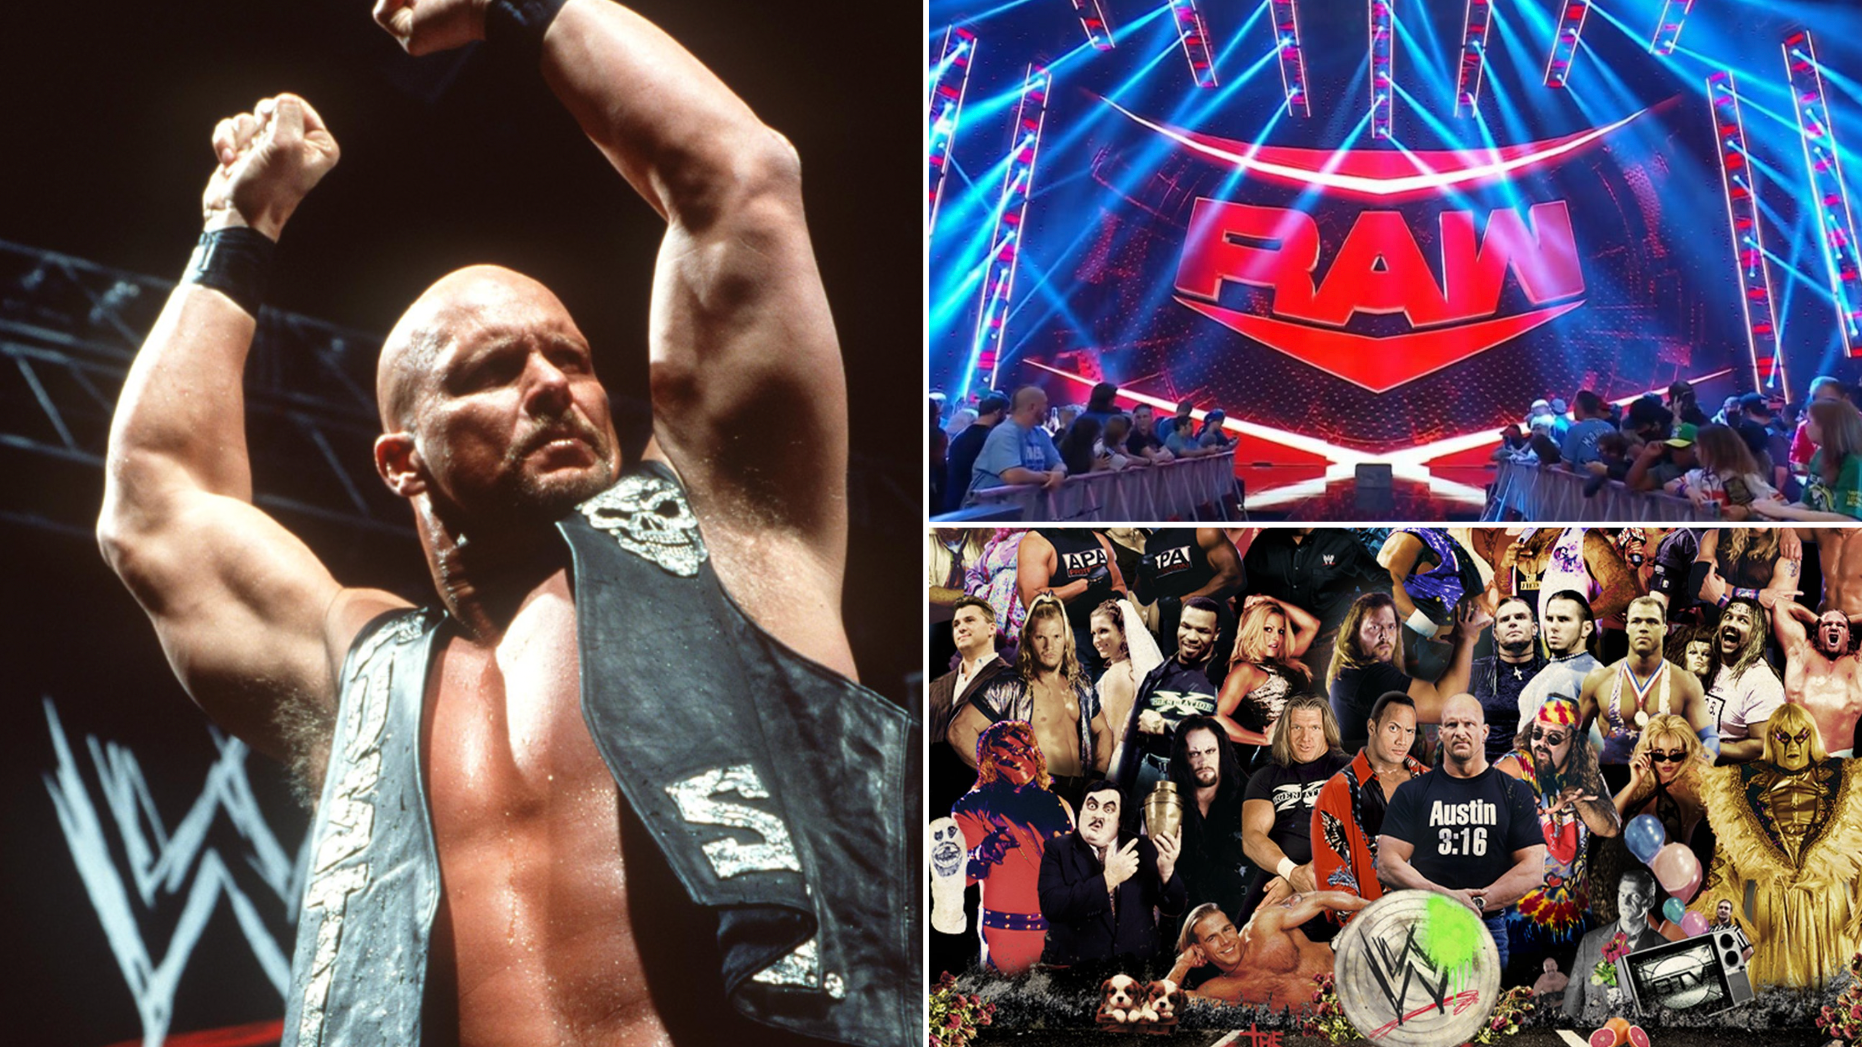 Wwe Raw Sex 2019 - WWE Could Return To The Attitude Era With New Parental Rating